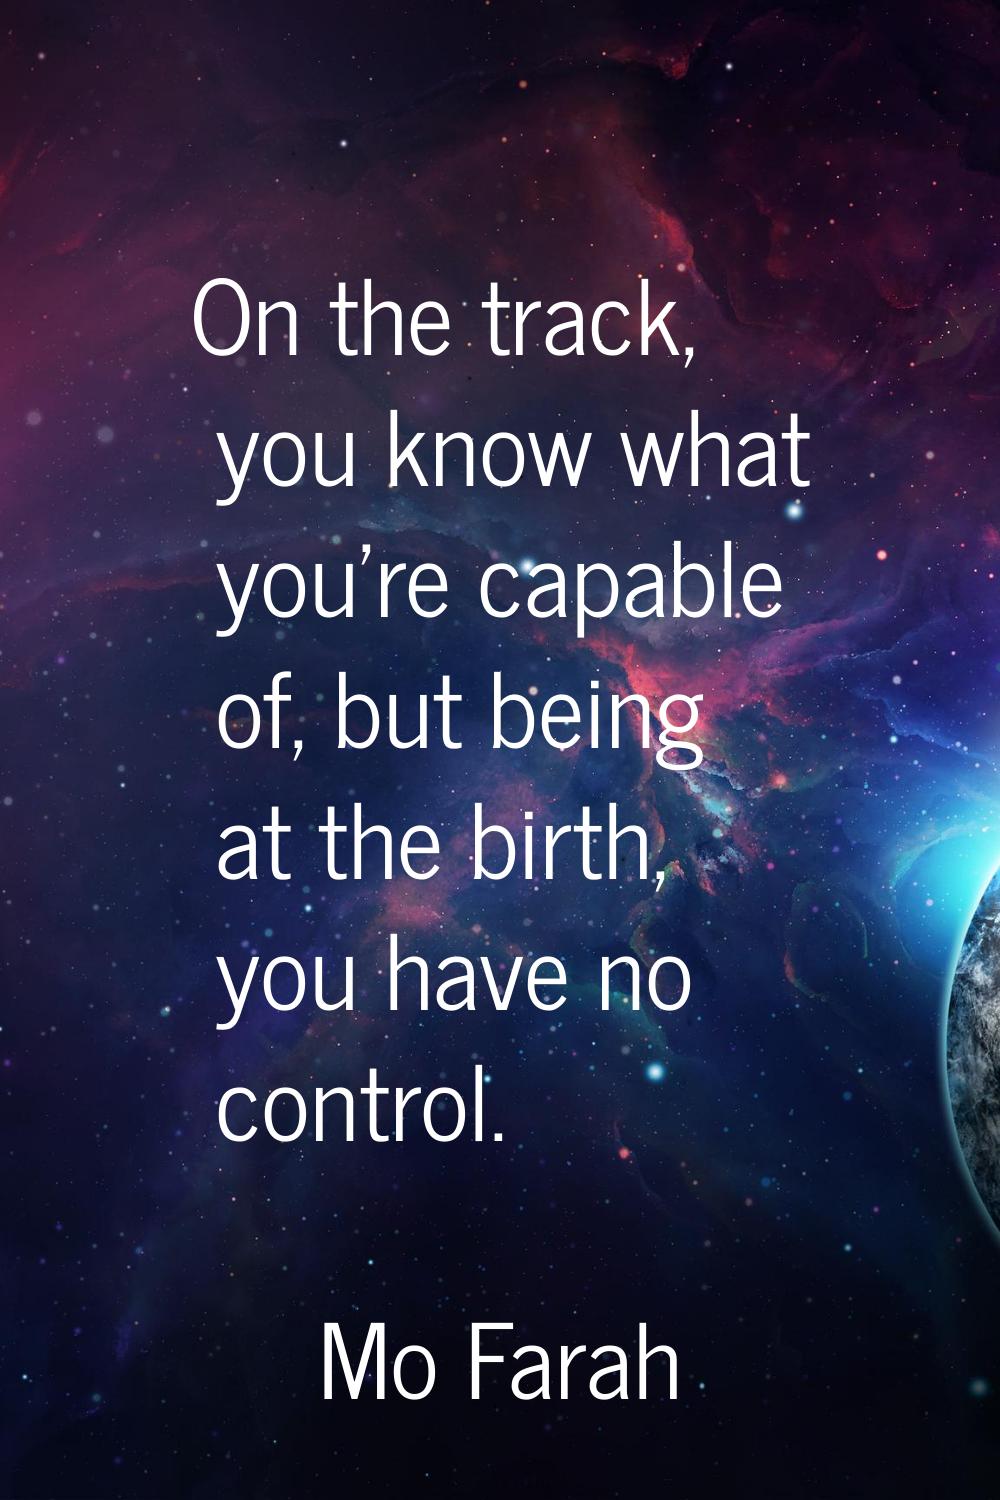 On the track, you know what you're capable of, but being at the birth, you have no control.